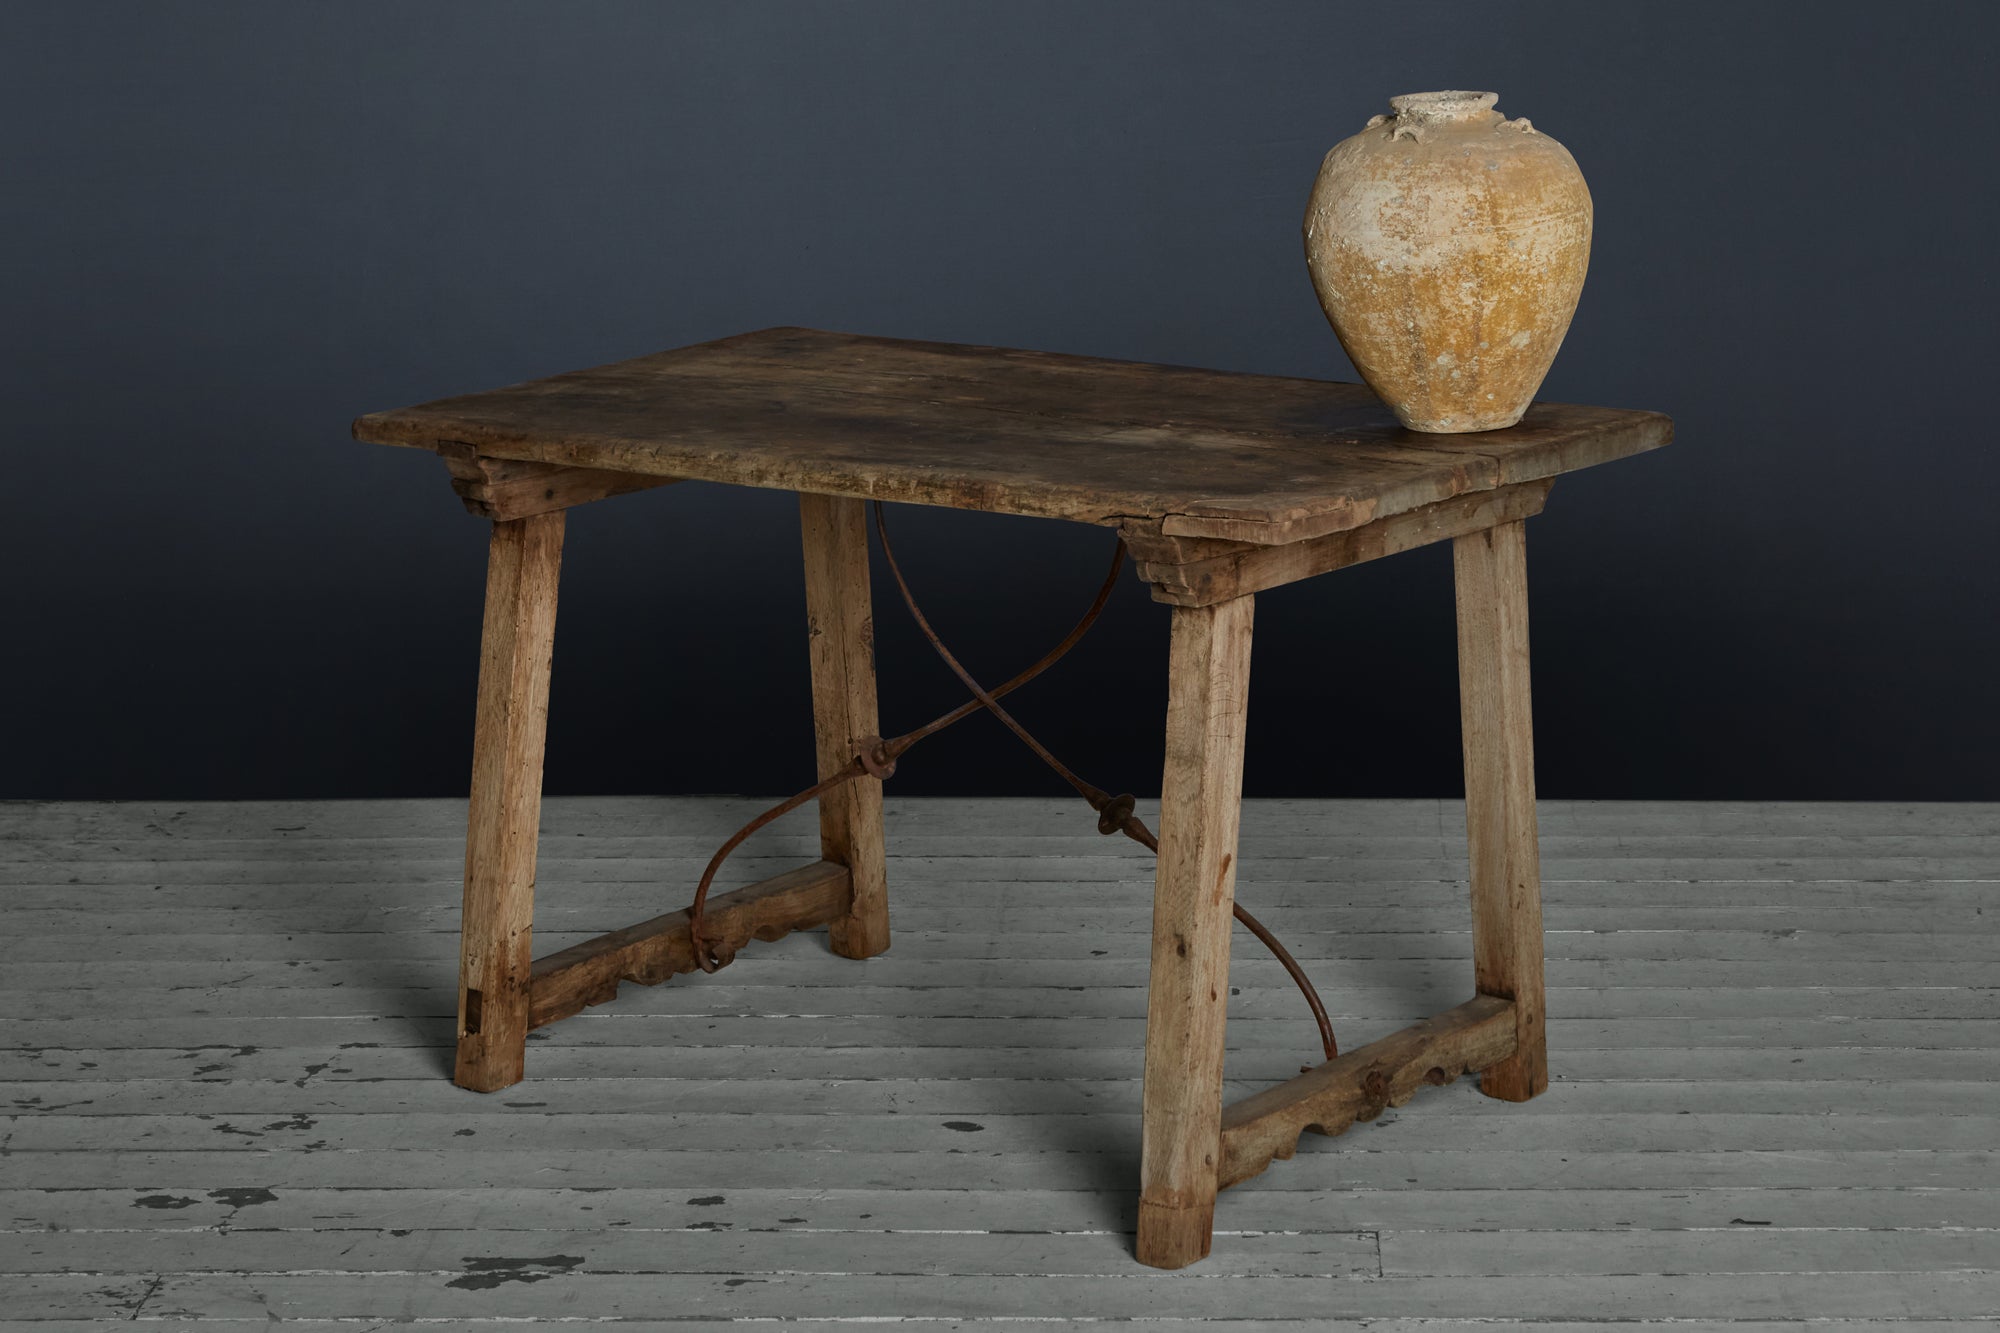 Late 17th/early 18th cenutry Spanish Table from Catalonia